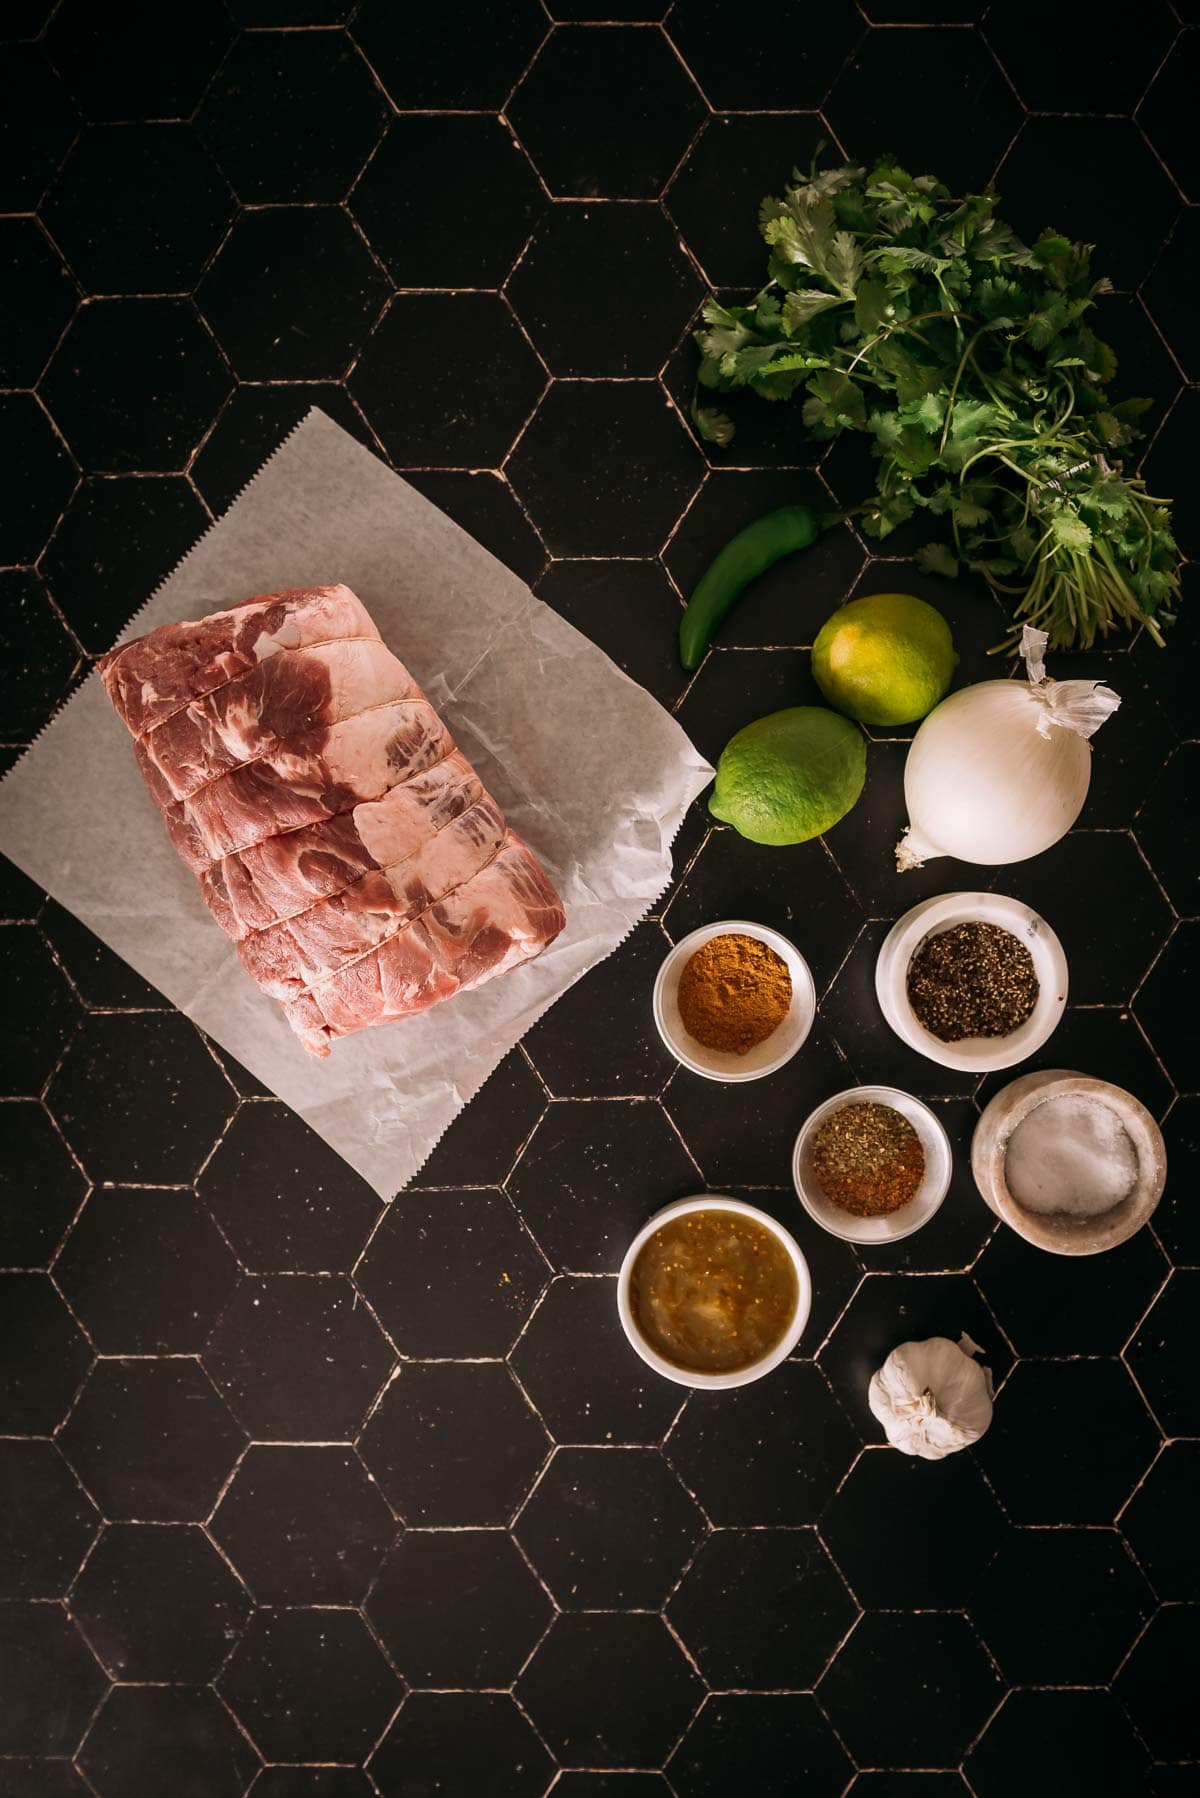 Ingredients for a recipe arranged on a dark tiled surface, including a slab of raw pork shoulder, herbs, spices, lime, and onion.